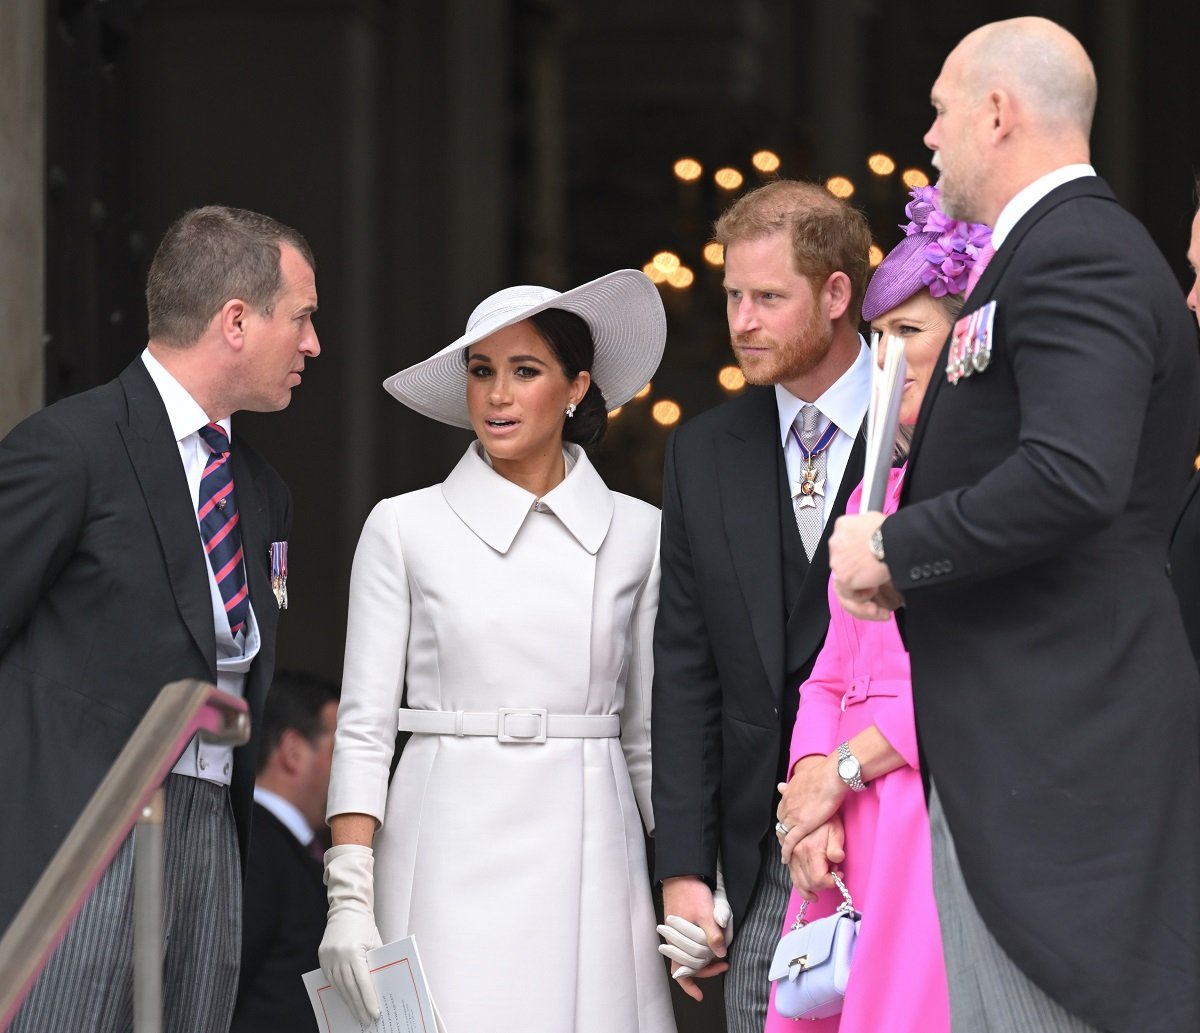 Meghan Markle and Prince Harry, who a commentator claims the royal family is ready to 'alienate,' attend the National Service of Thanksgiving at St Paul's Cathedral